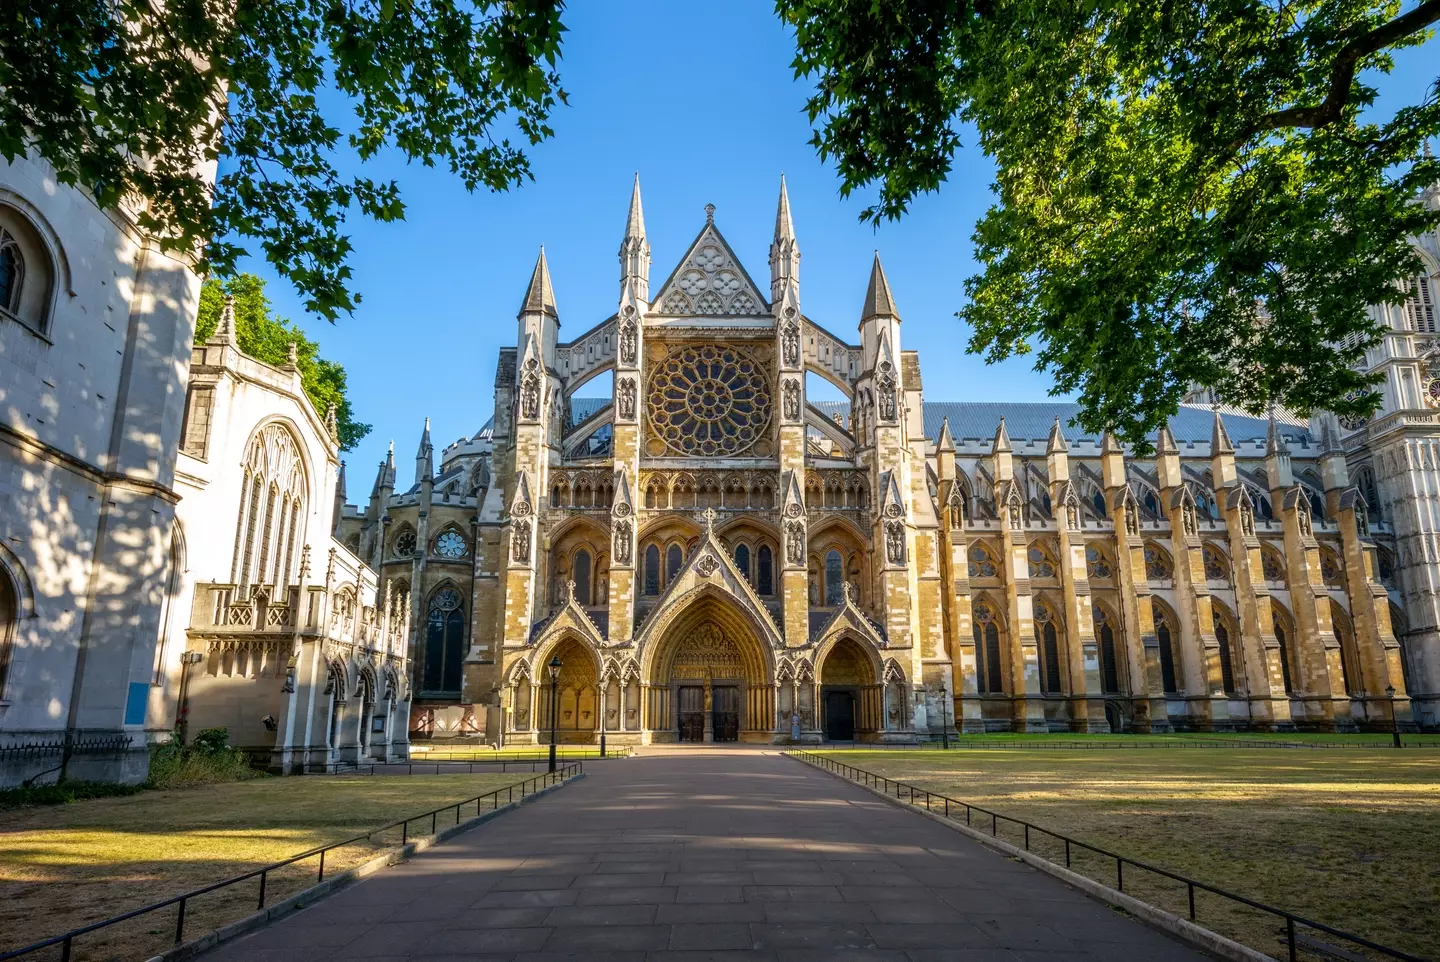 The Queen's funeral will be held at Westminster Abbey.